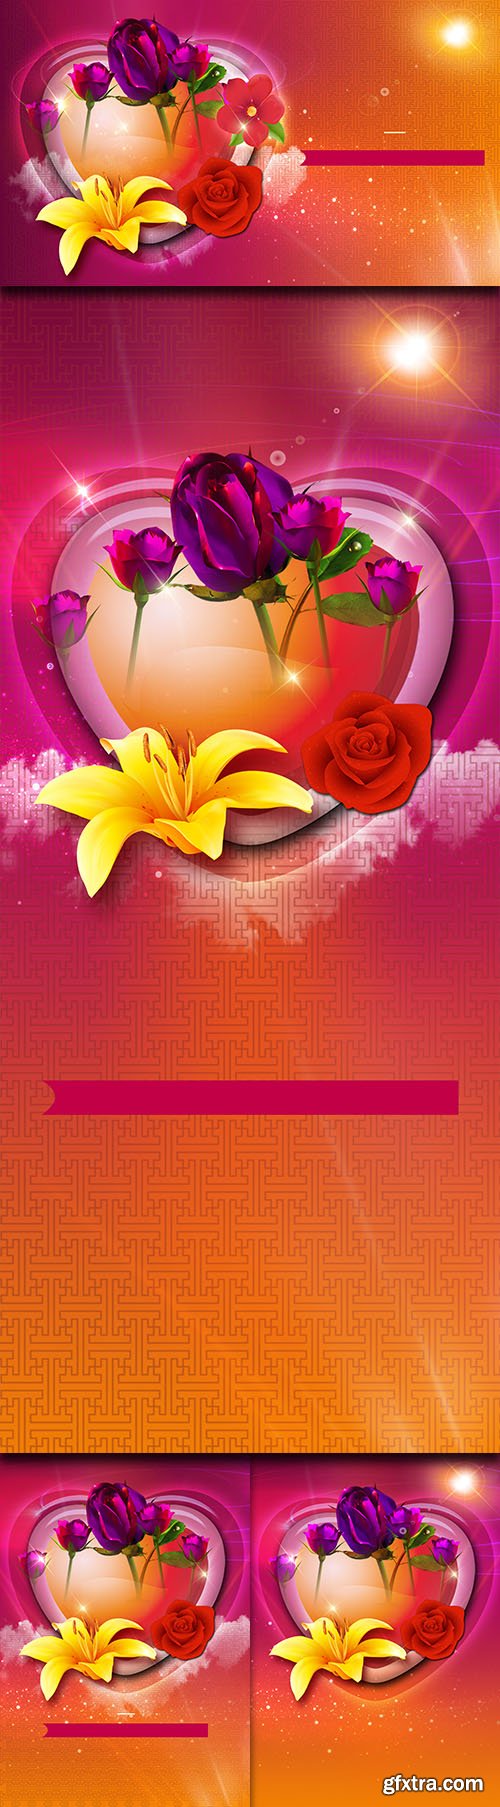 Romantic PSD Sources - Flowers In Heart